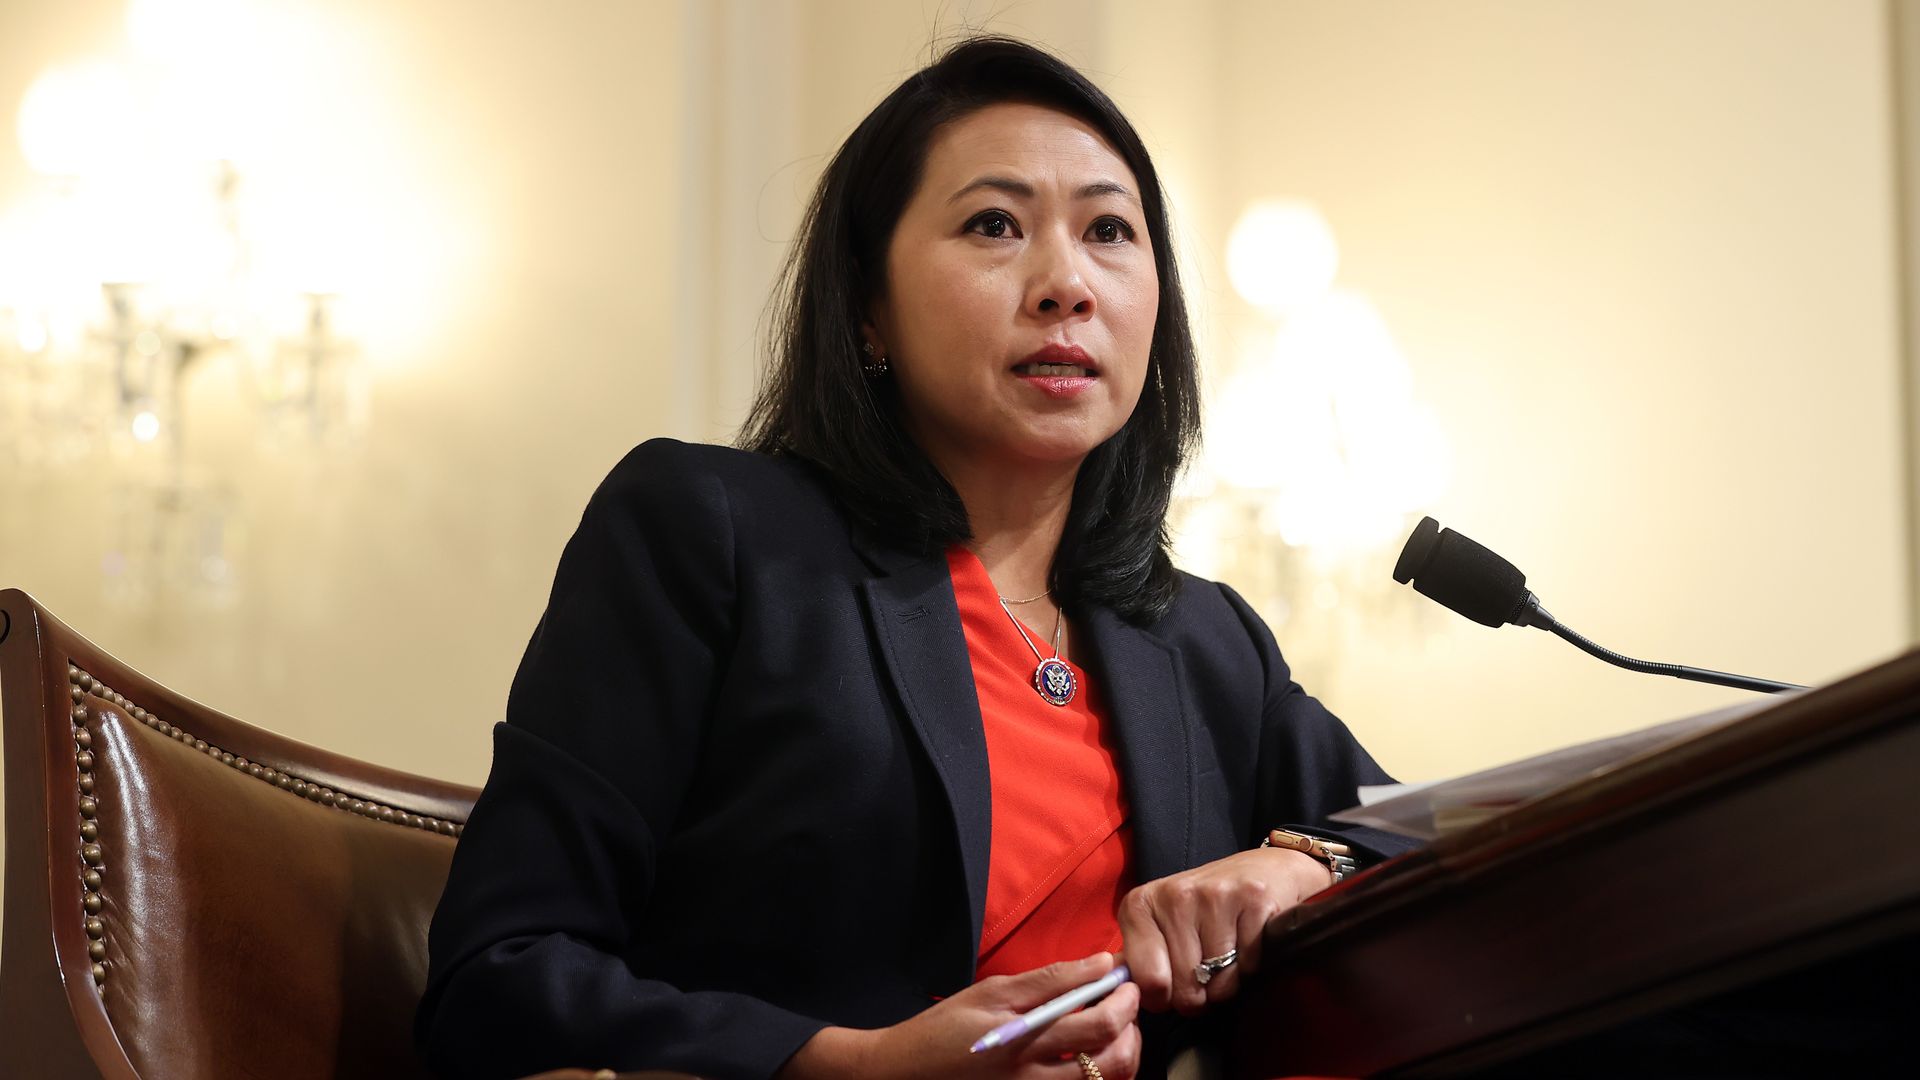 Rep. Stephanie Murphy is seen during a congressional hearing.